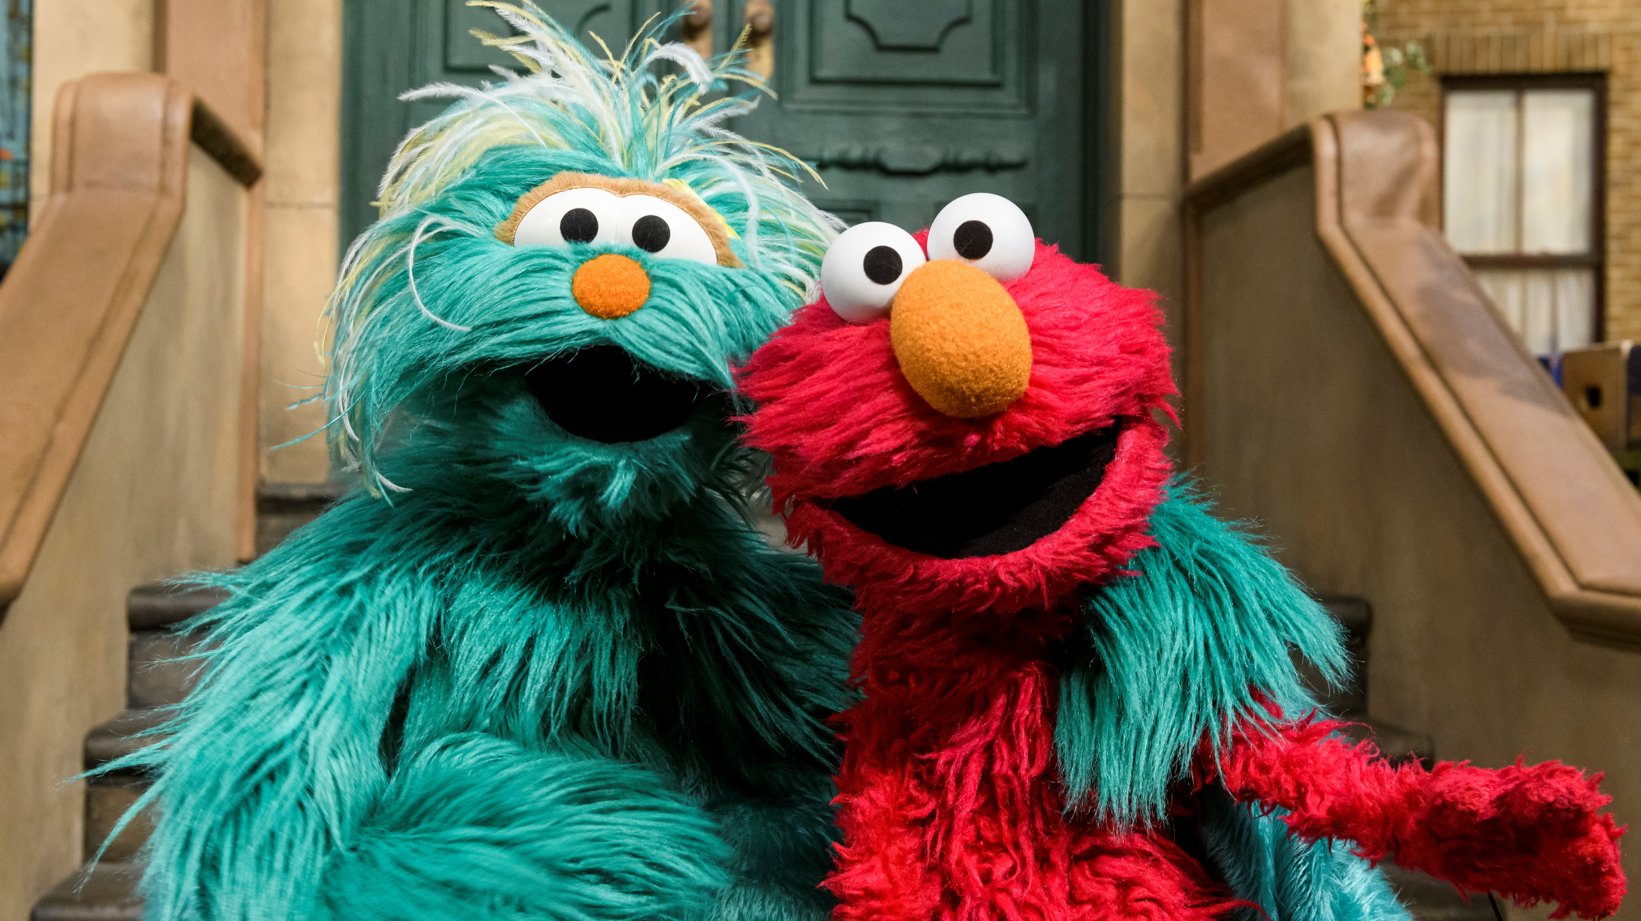 Elmo on Twitter: "Happy Birthday to friend Rosita! Thank you for teaching Elmo all about your Mexican heritage. Elmo loves learning from and being your #HappyBirthdayRosita https://t.co/VEykcuKqbW" / Twitter